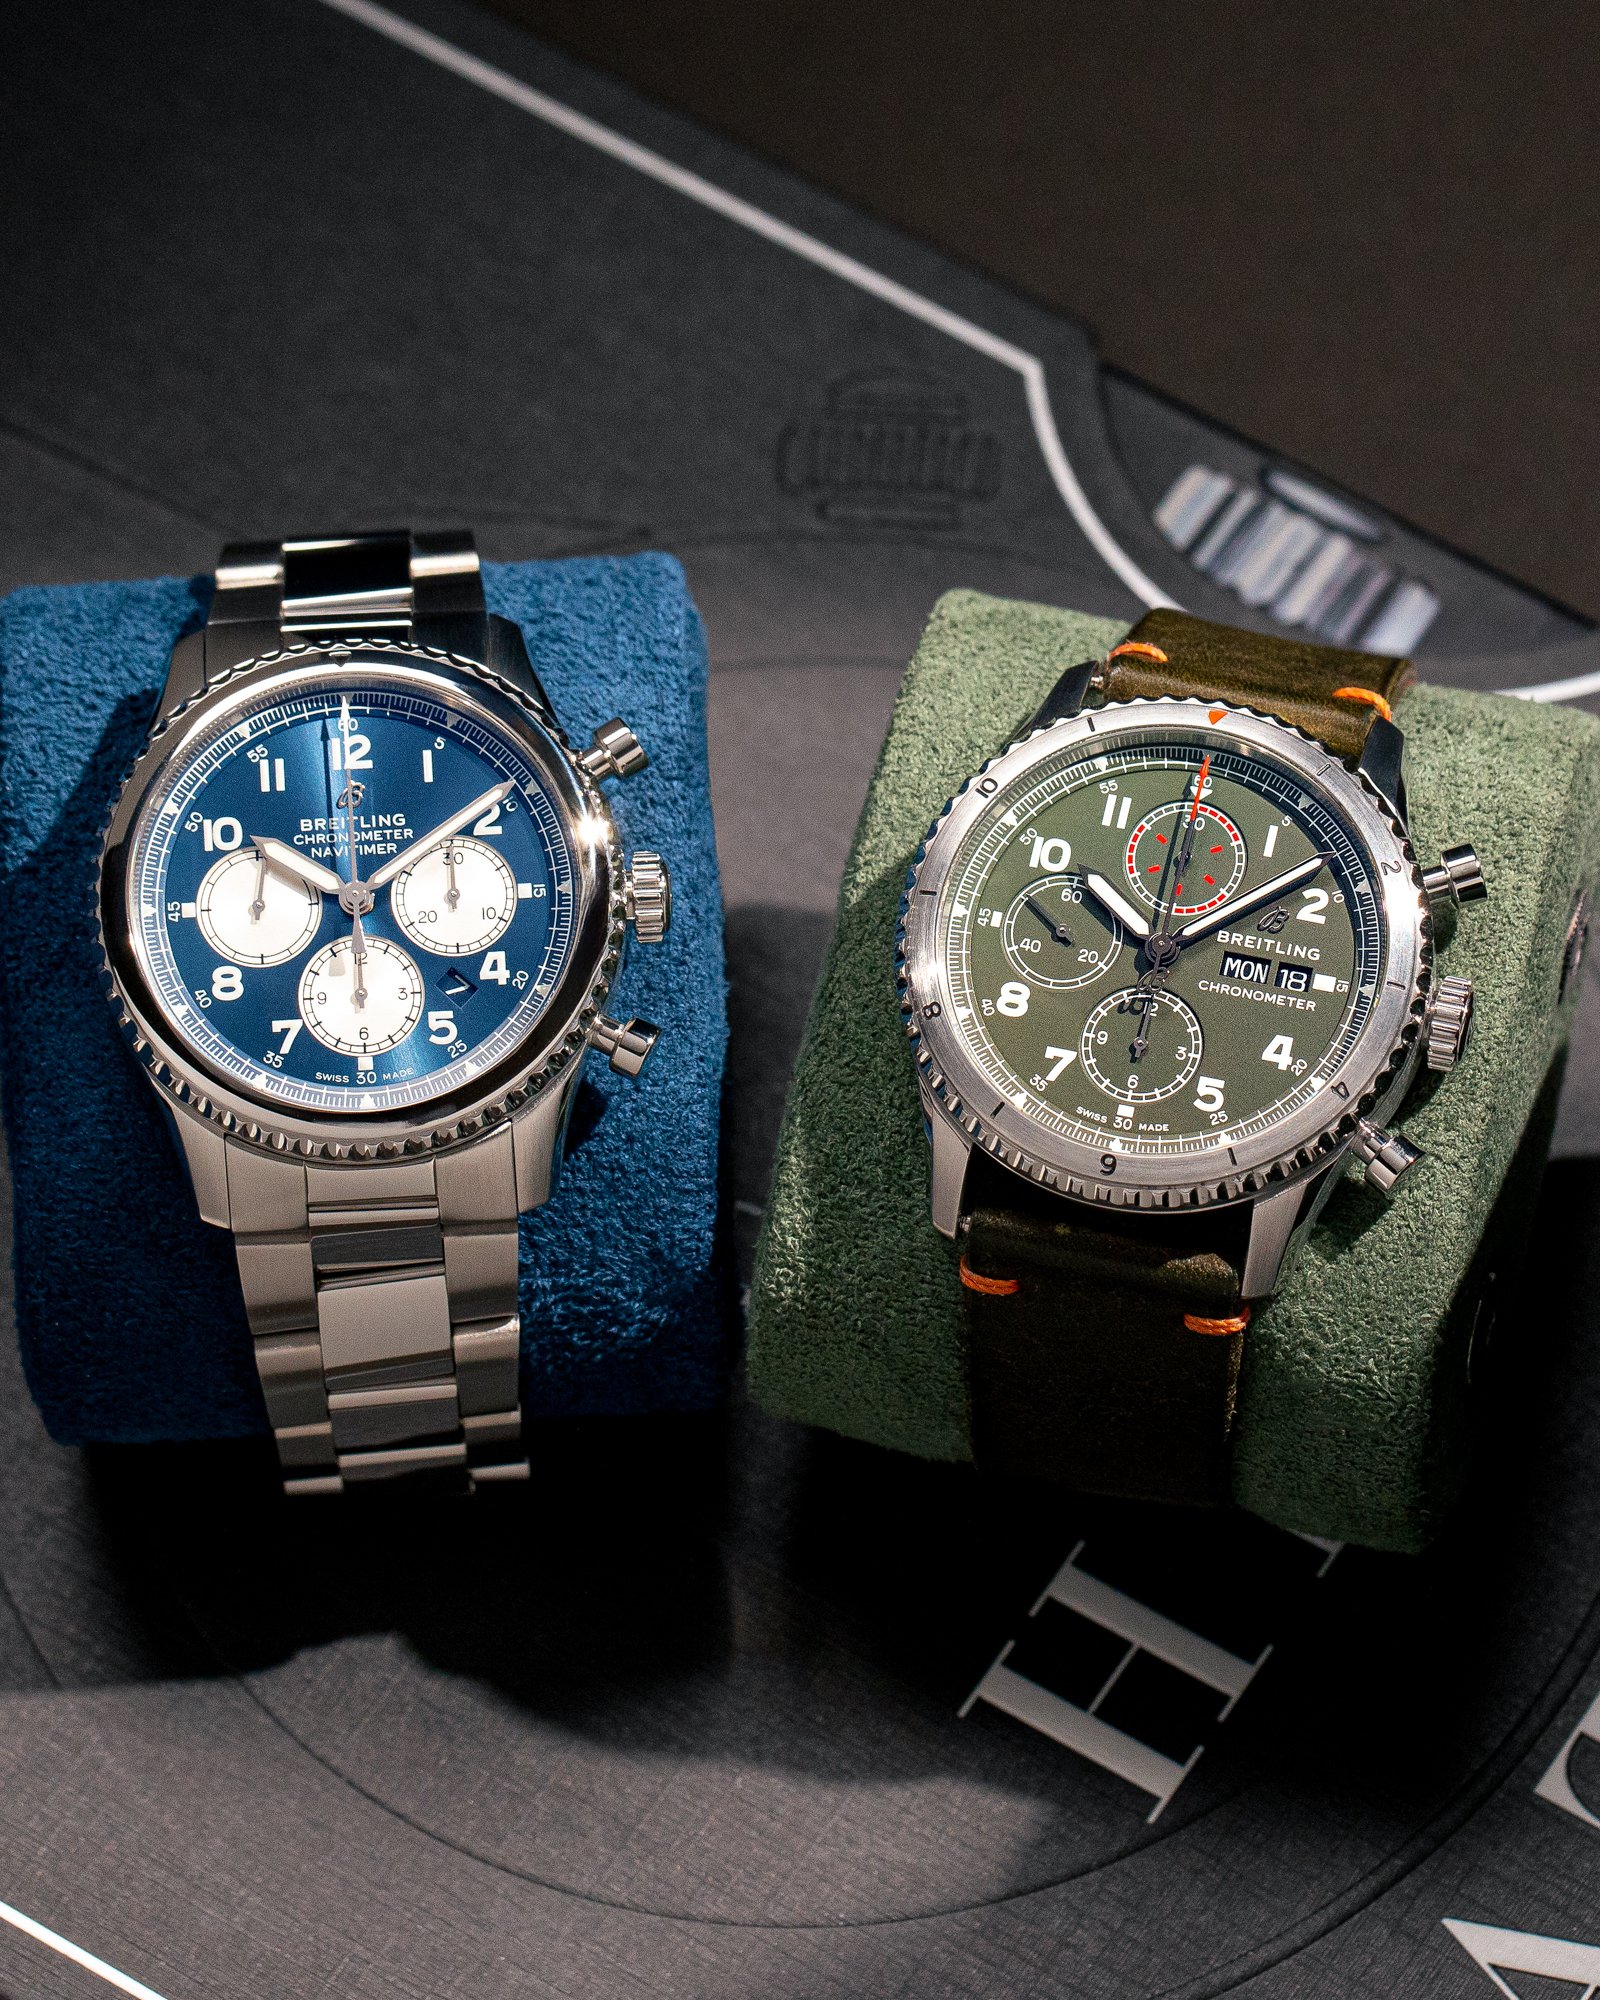 Take one of these away with you! Breitling Aviator 8 A133161A1L1X1 - Breitling Navitimer 8 Chronograph AB0117131C1A1 💙or💚

 #breitling #breitlingwatches #BreitlingNavitimer #breitlingchronomat #breitlingsuperocean #breitlingwatch #breitlingwatches 